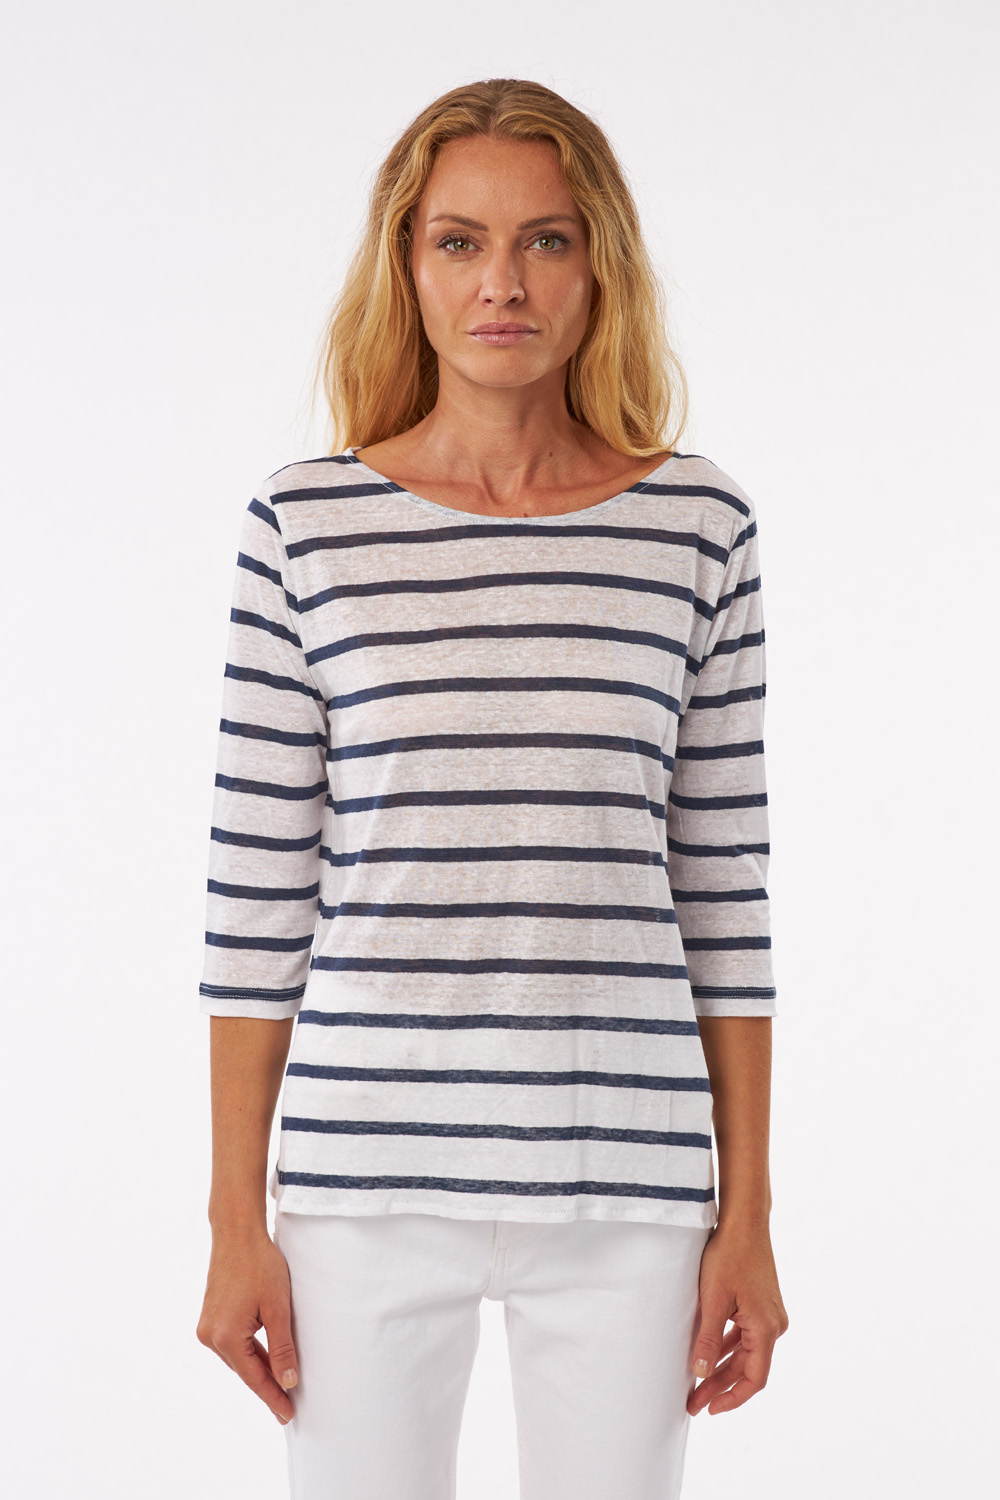 crewneck striped t-shirt in light linen, sleeves at elbow